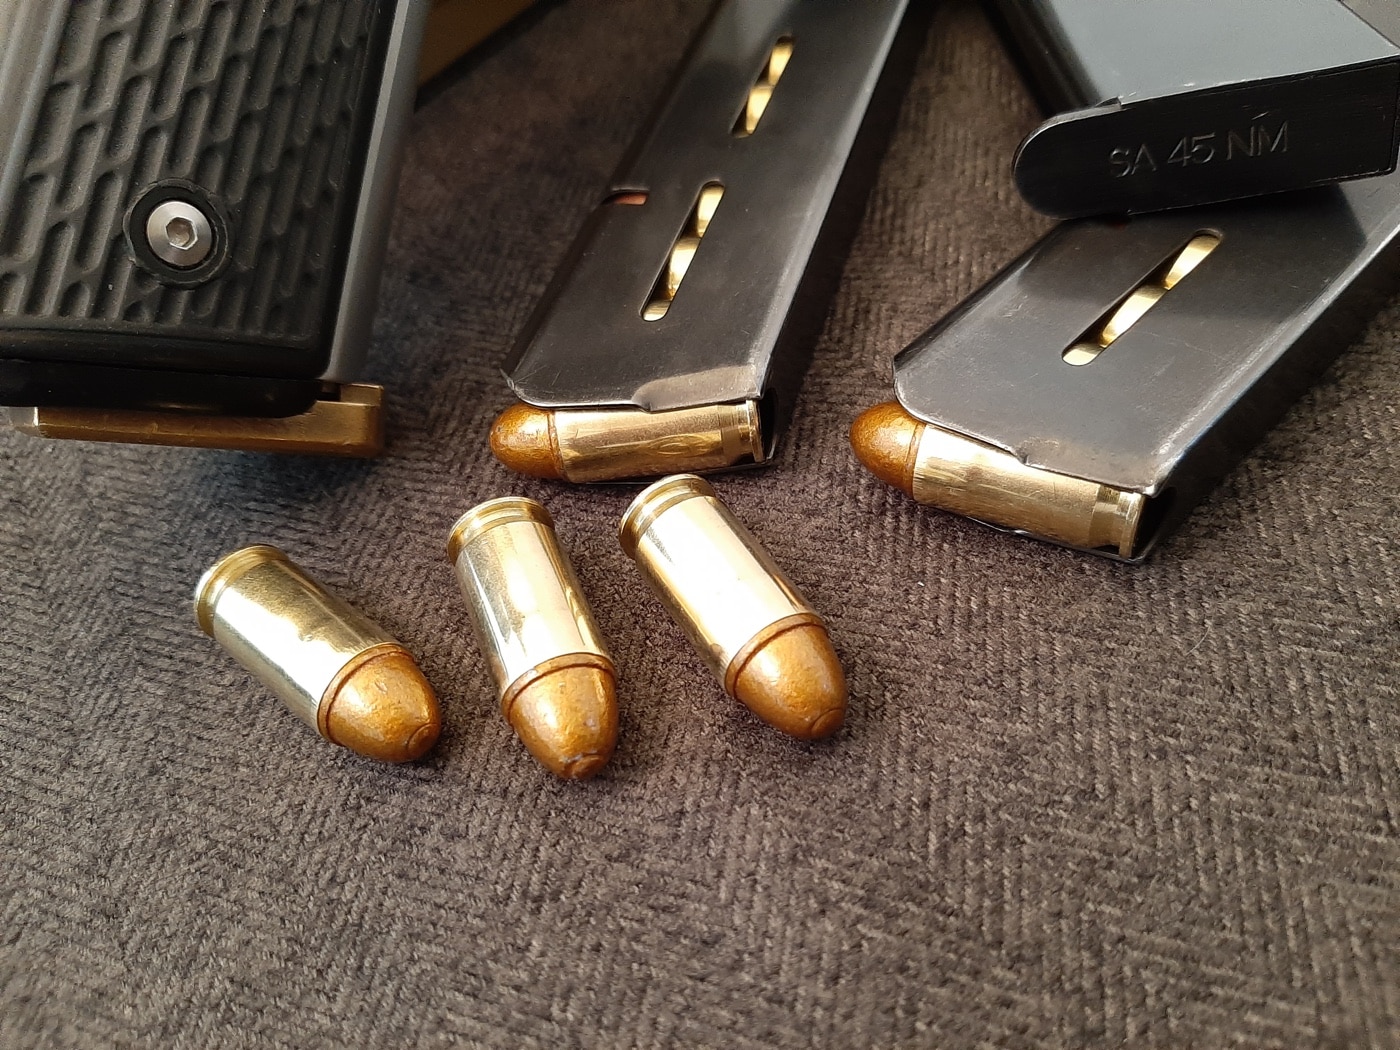 review of dl sports 45 acp gsp ammo